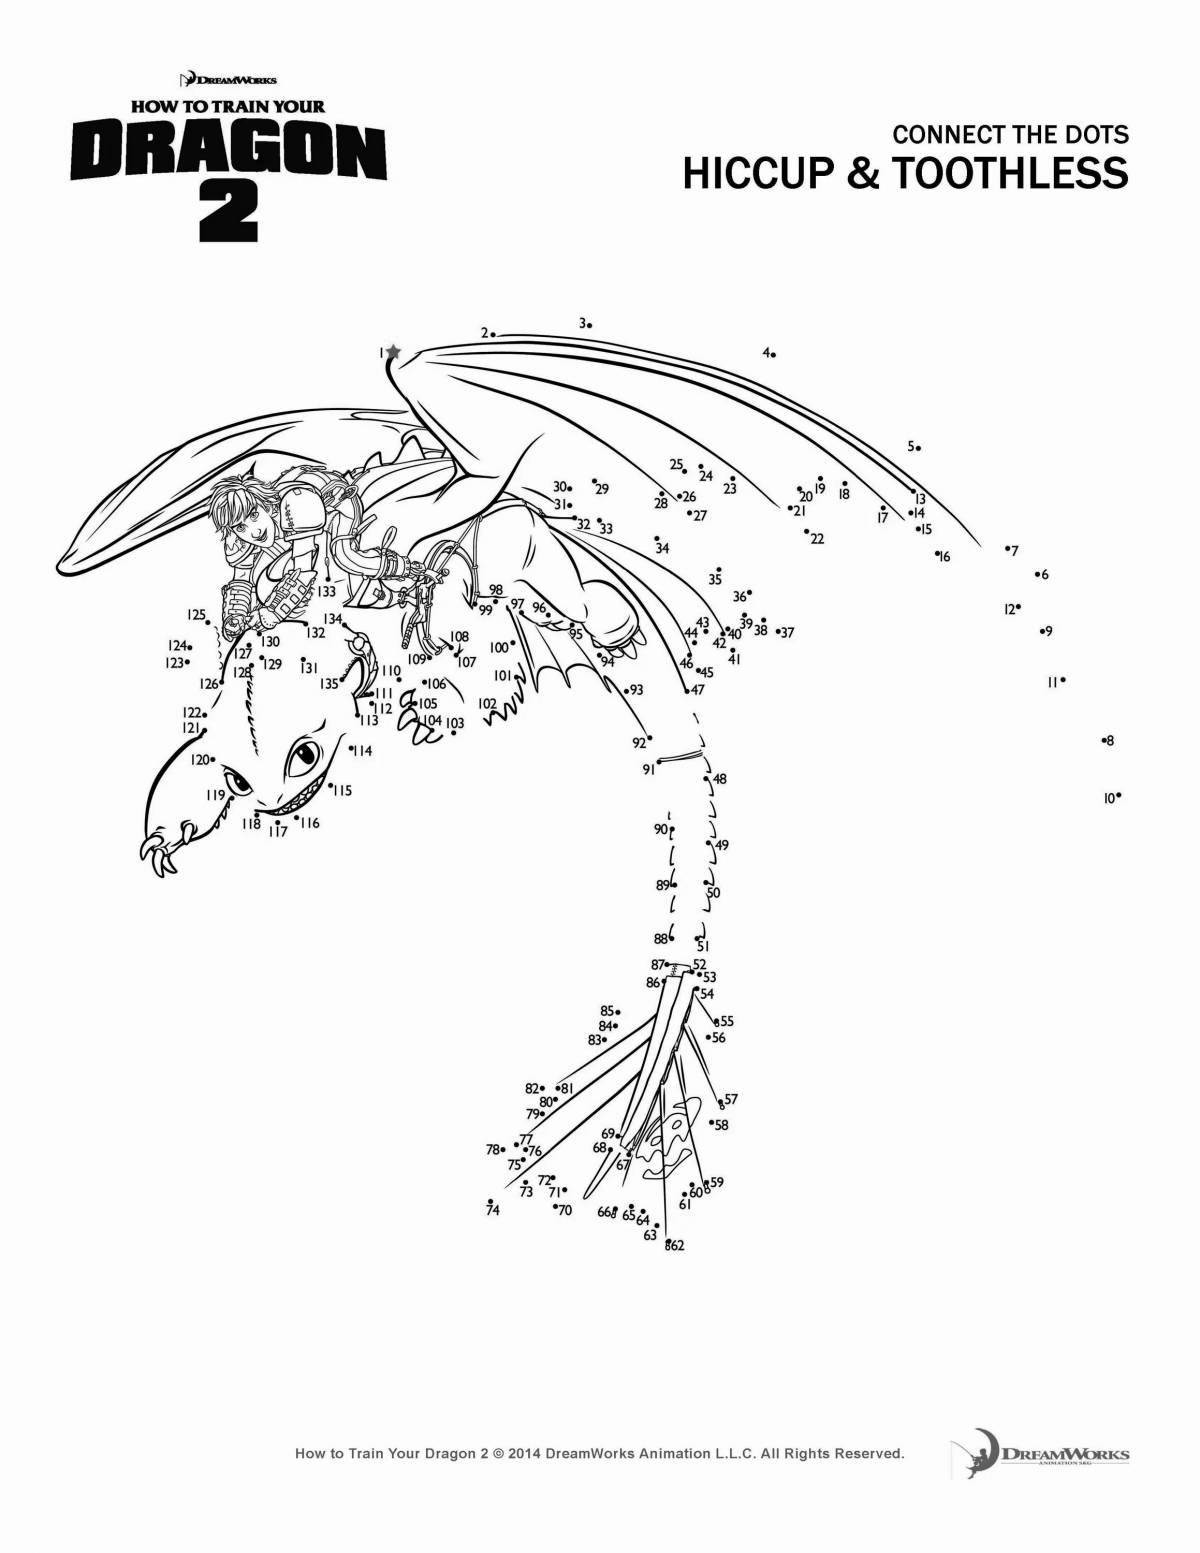 Toothless charm coloring by numbers